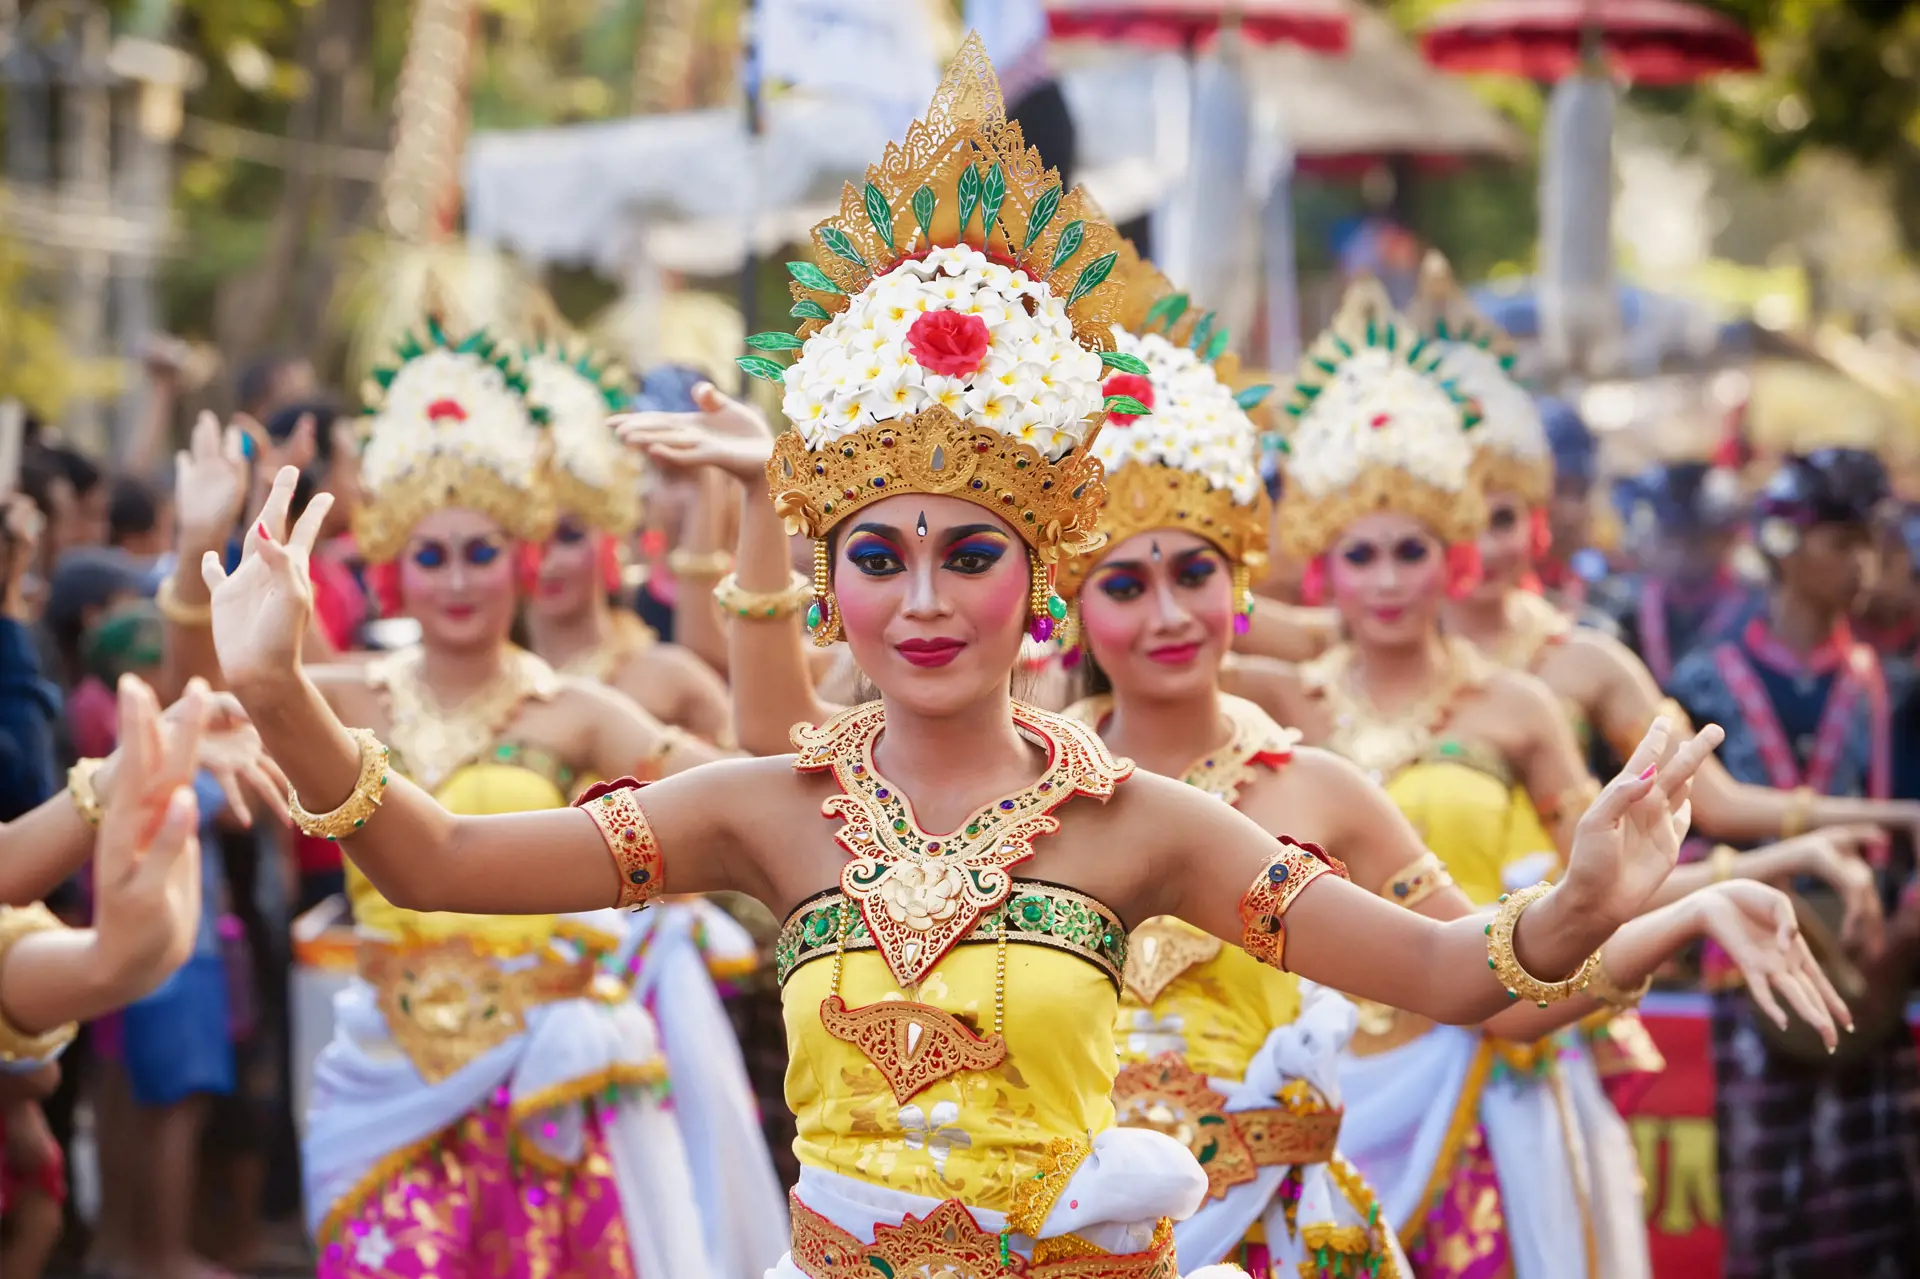 shutterstock_347774750 BALI, INDONESIA - JUNE 13, 2015 Women group dressed in colorful sarongs - Balinese style female dancer costume, dancing traditional temple dance Legong at Bali Art and Culture Festiv.jpg